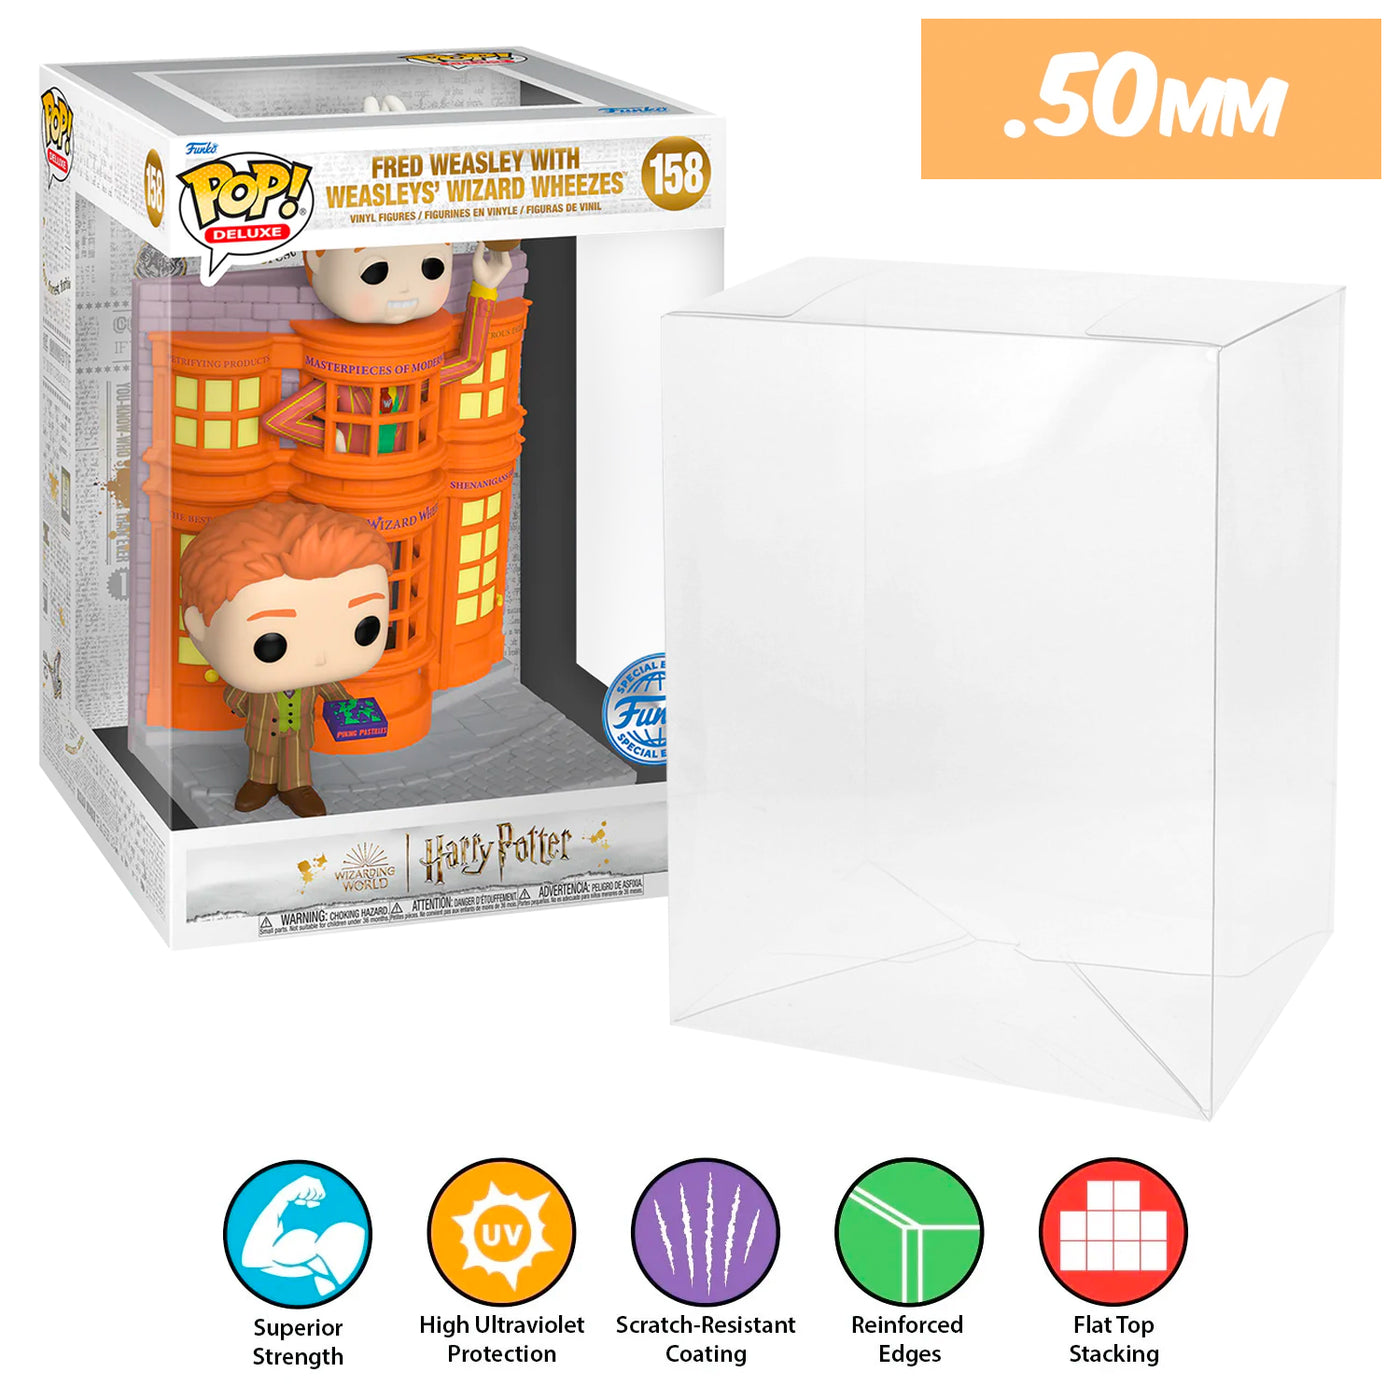 158 fred weasley with weasleys wizard wheezes pop deluxe best funko pop protectors thick strong uv scratch flat top stack vinyl display geek plastic shield vaulted eco armor fits collect protect display case kollector protector